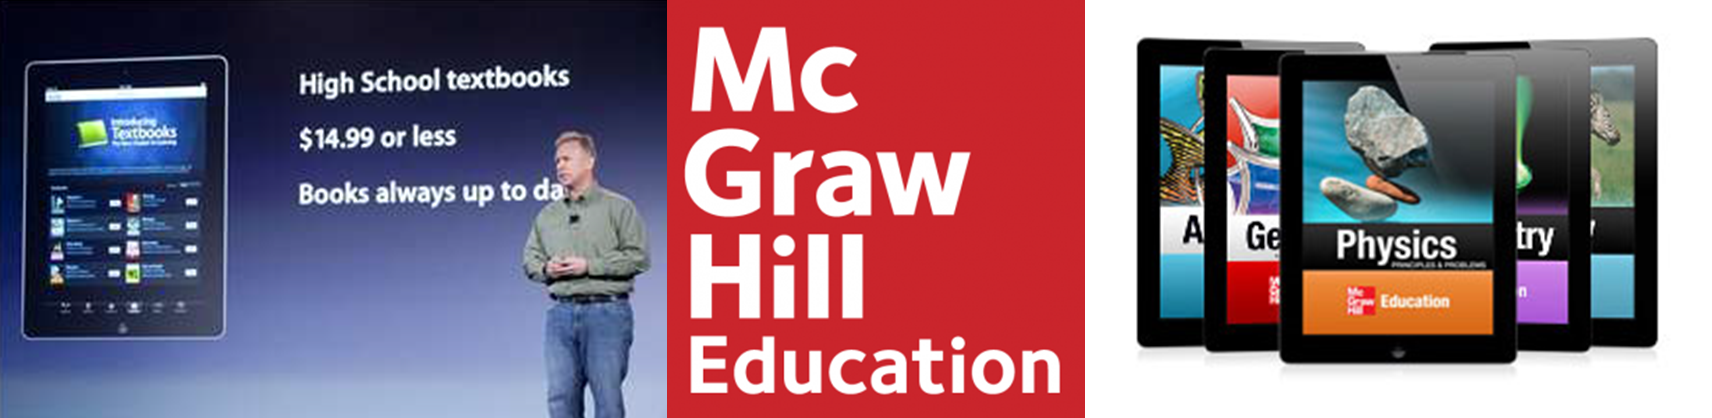  - Logo - https://s41078.pcdn.co/wp-content/uploads/2018/11/McGraw-Hill.png